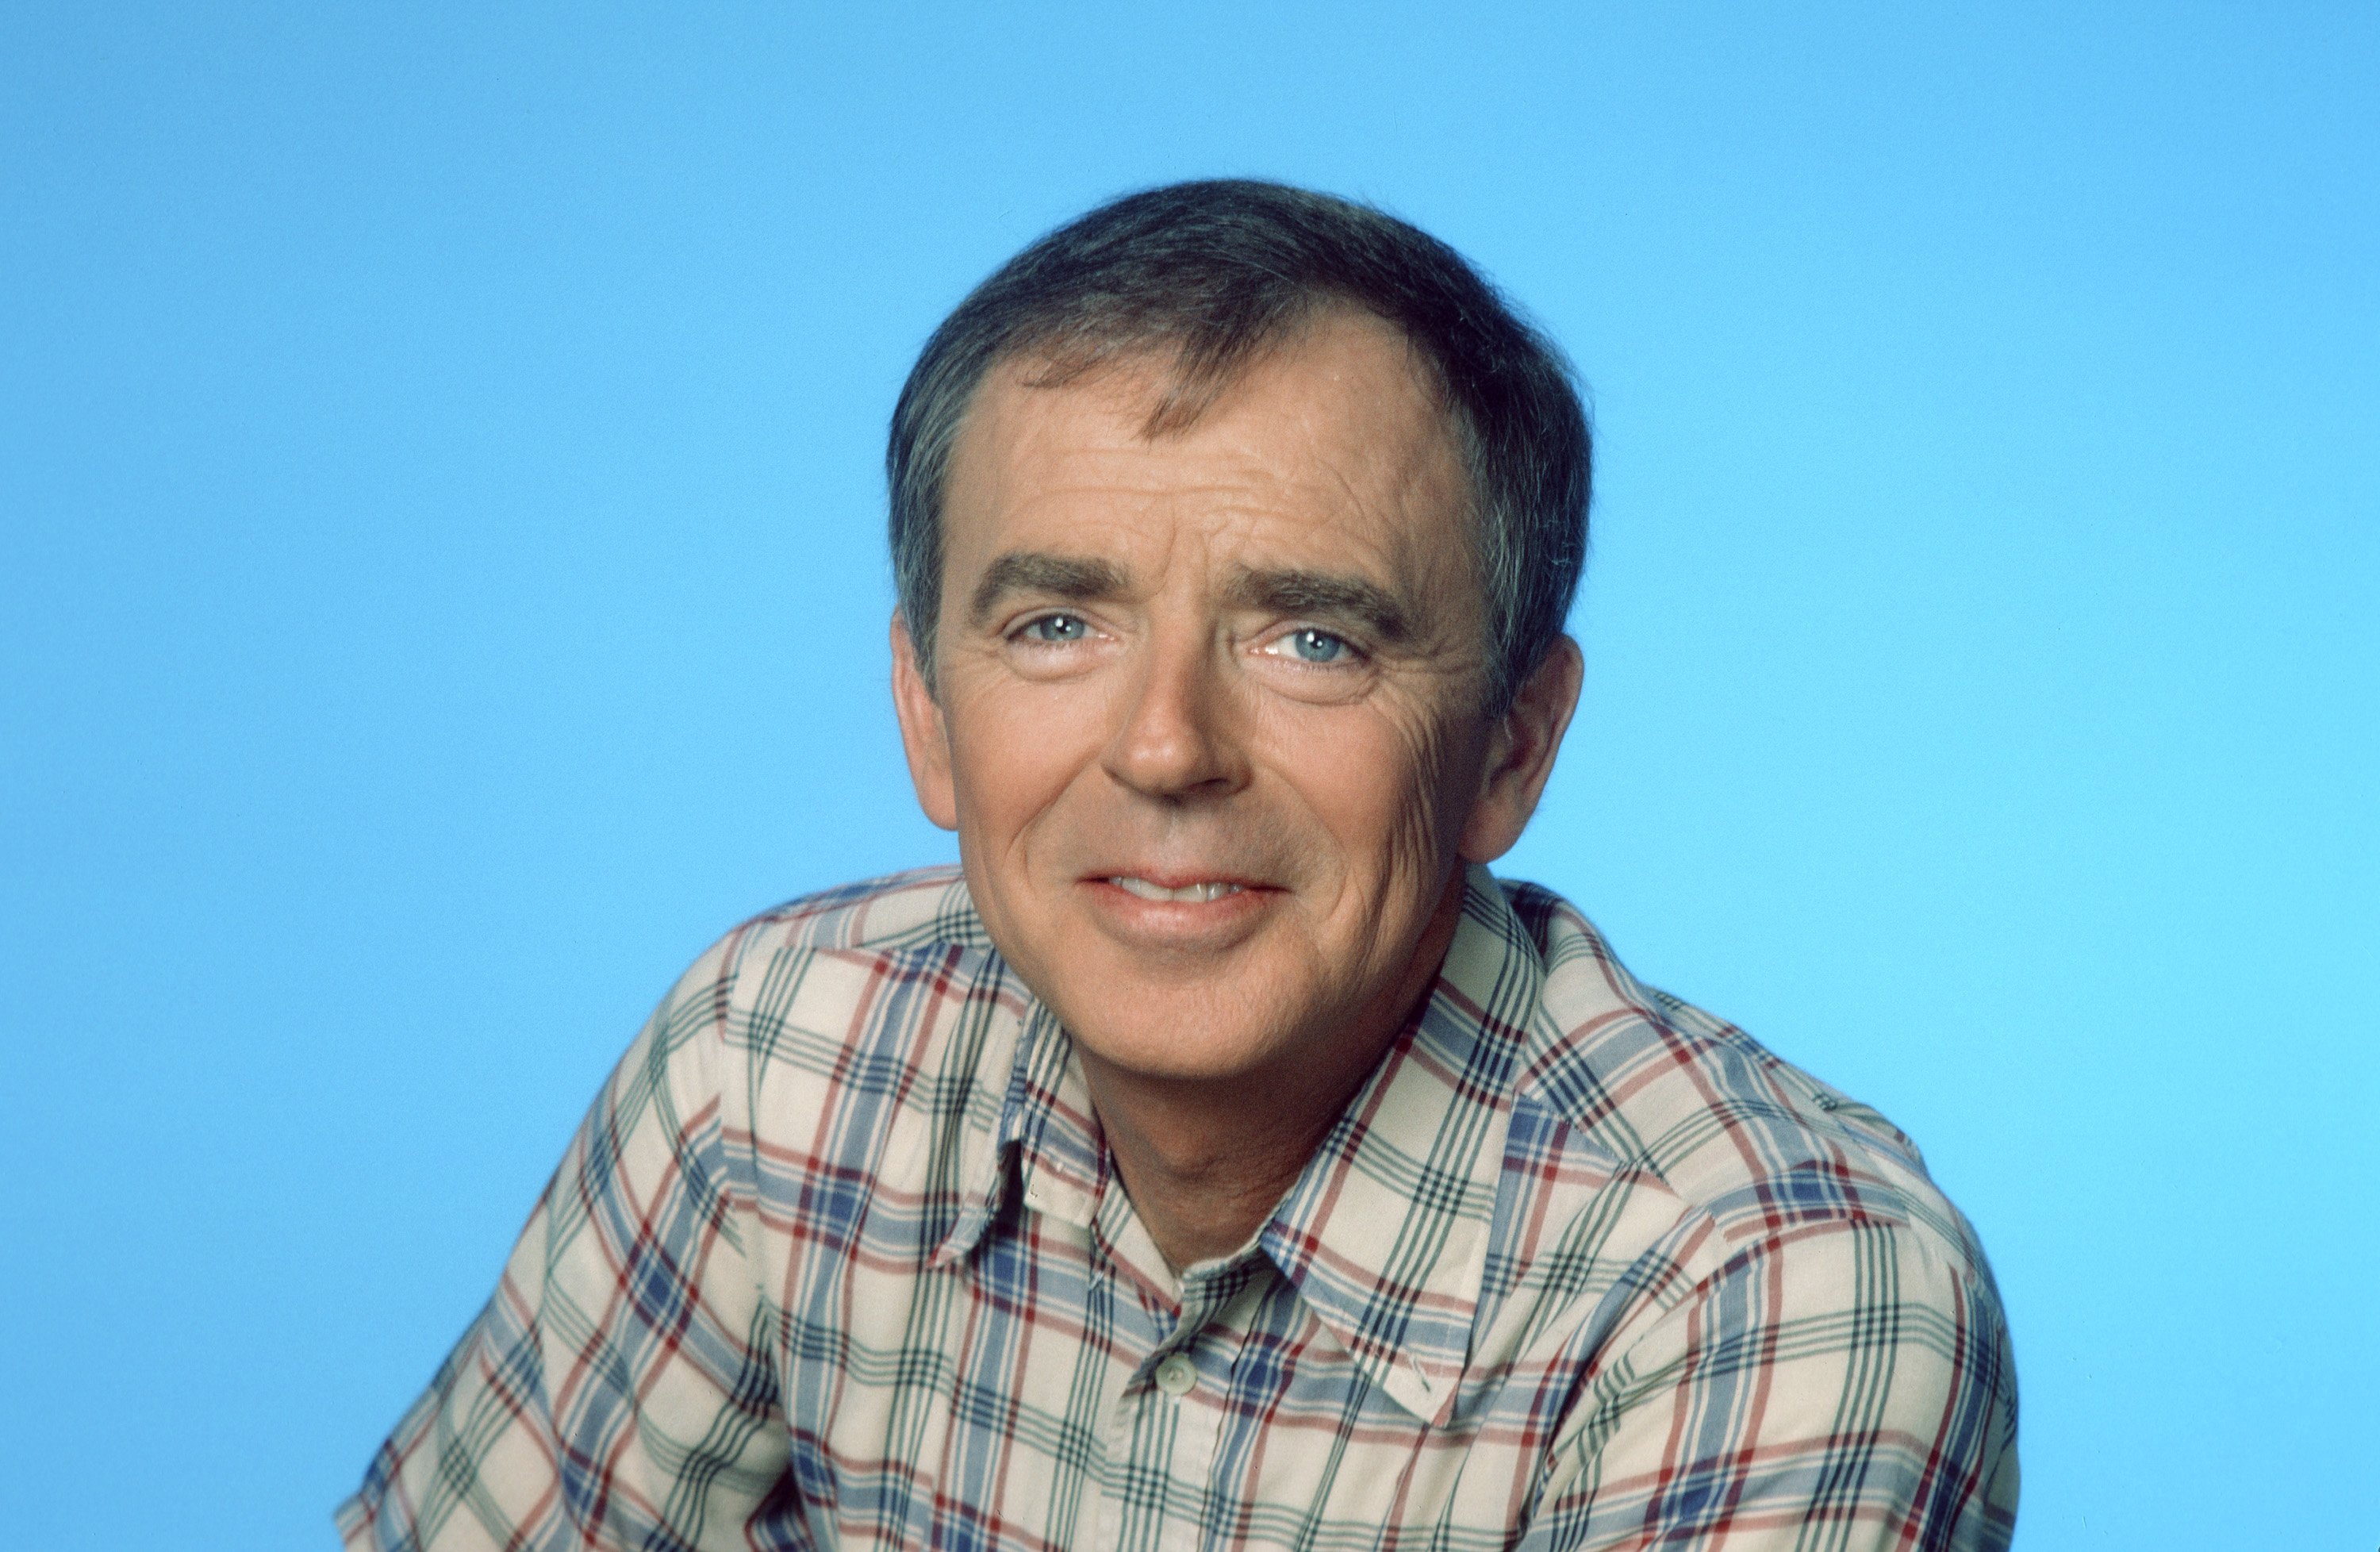 Photo of Ken Berry on "Mama's Family" | Source: Getty Images